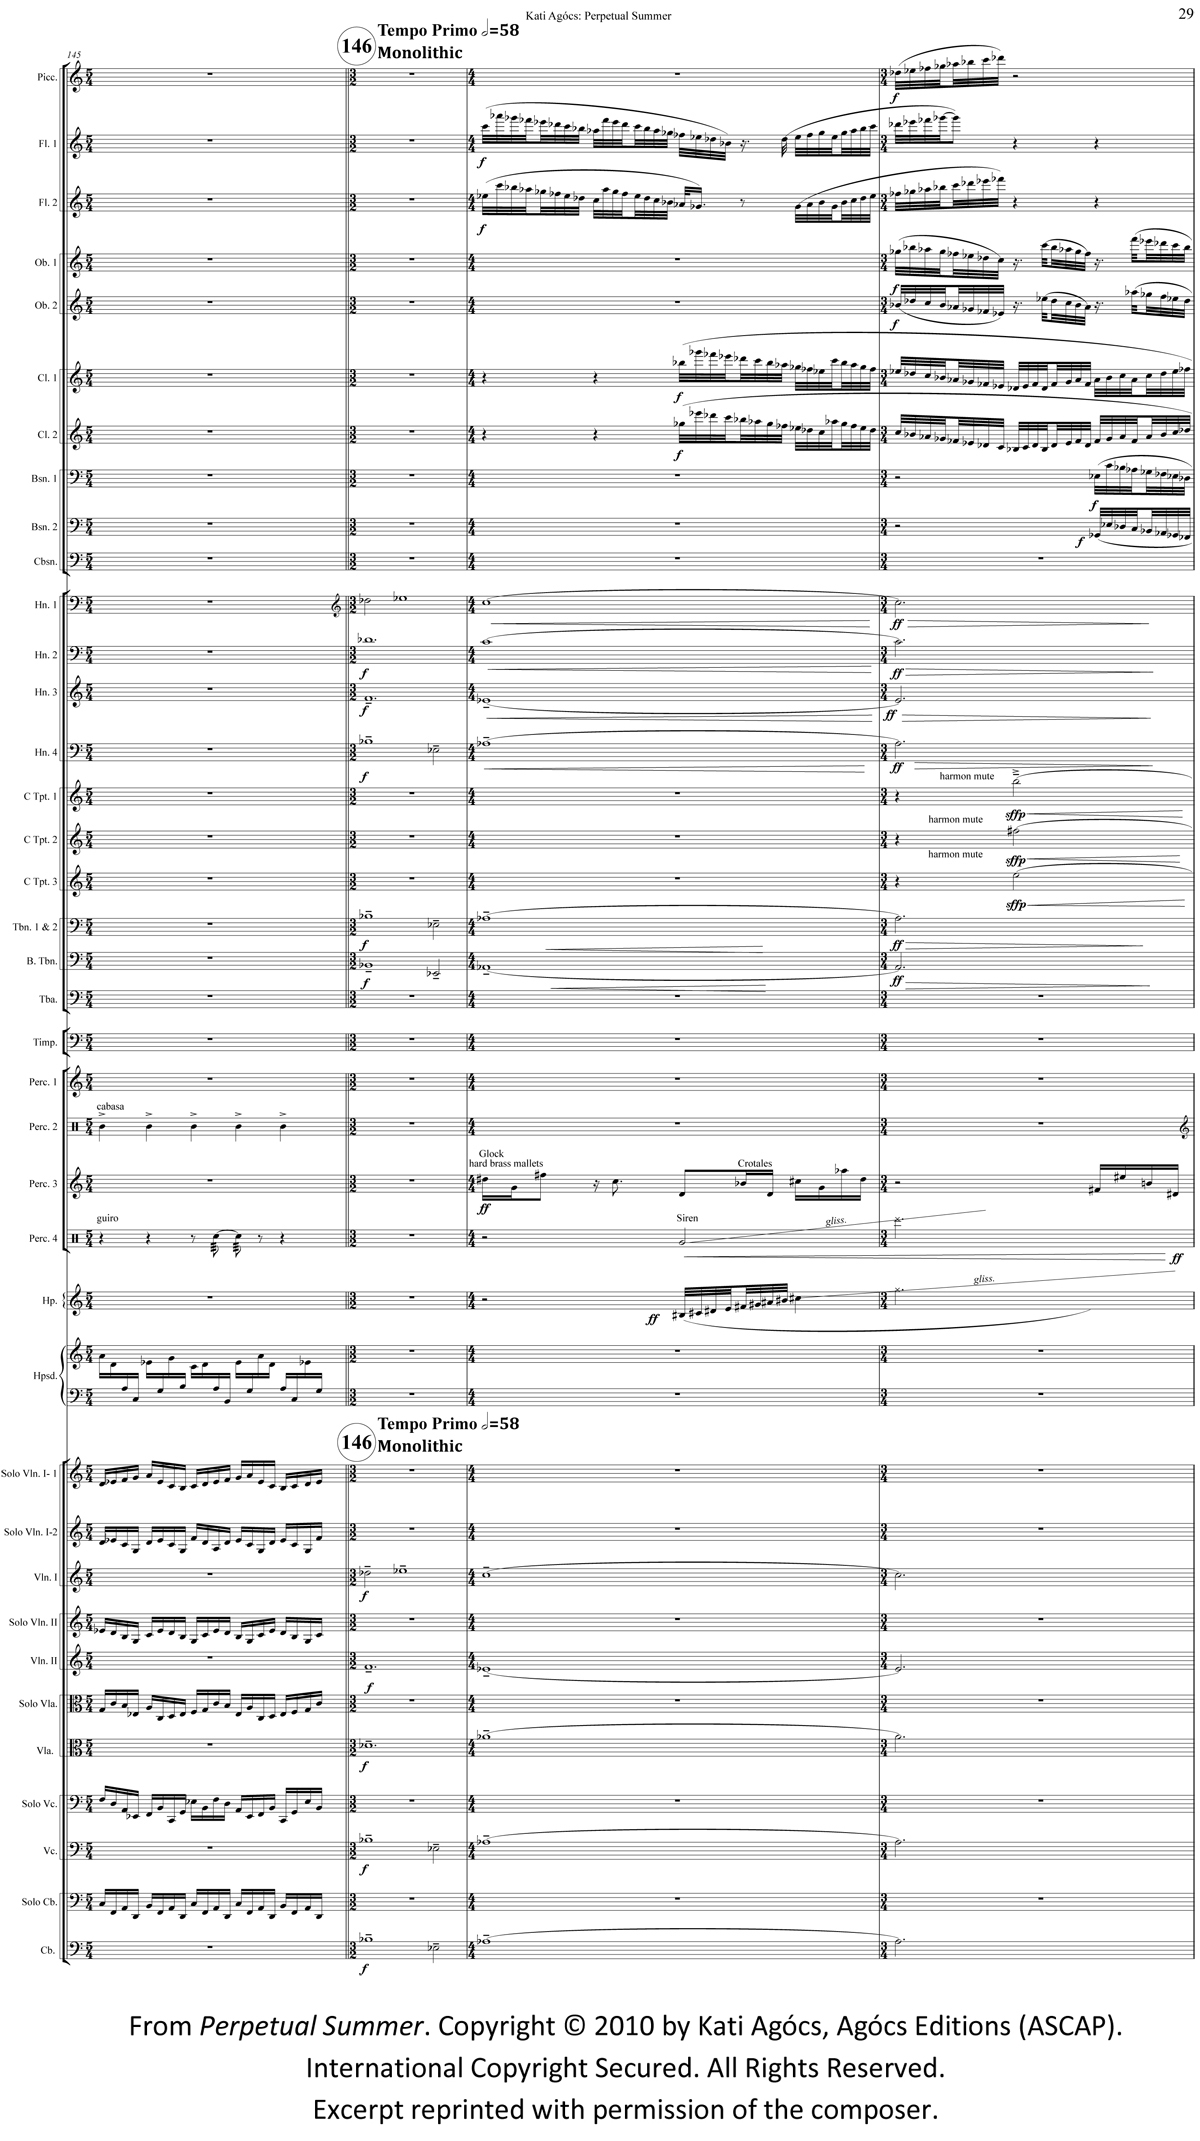 Page of orchestral score of Kati Agocs's Perpetual Summer